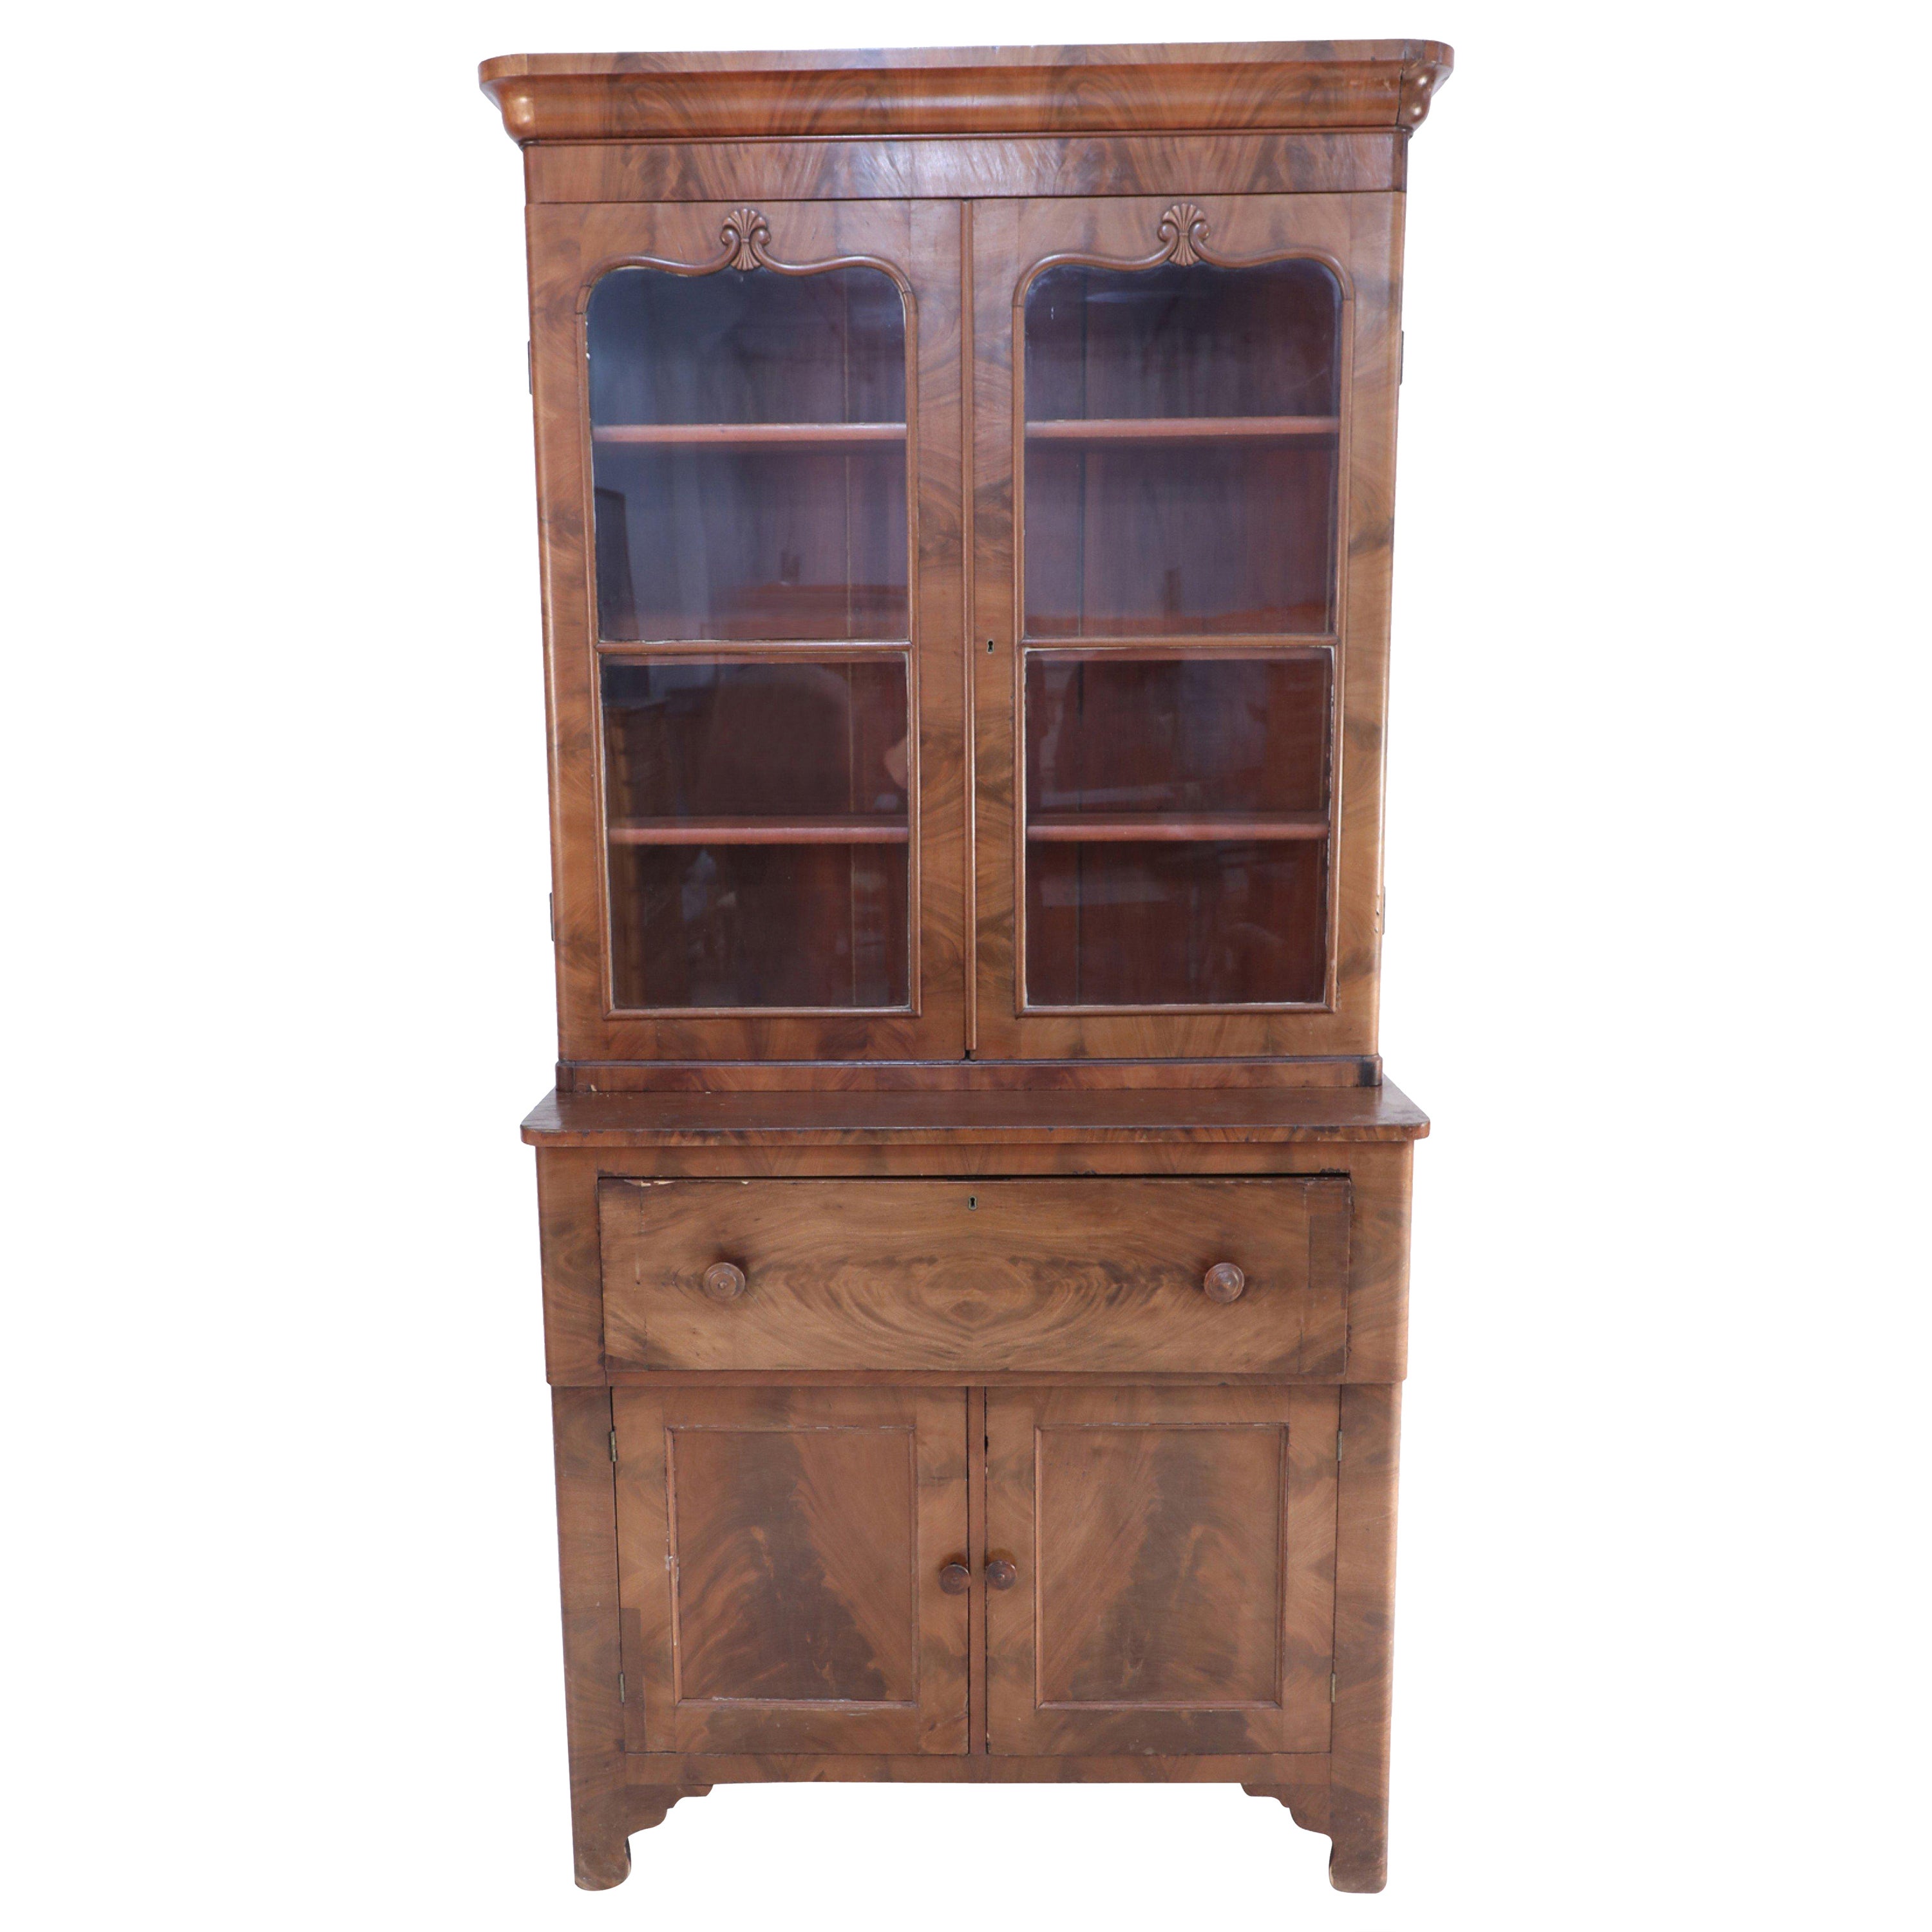 What is the front of a cabinet called?